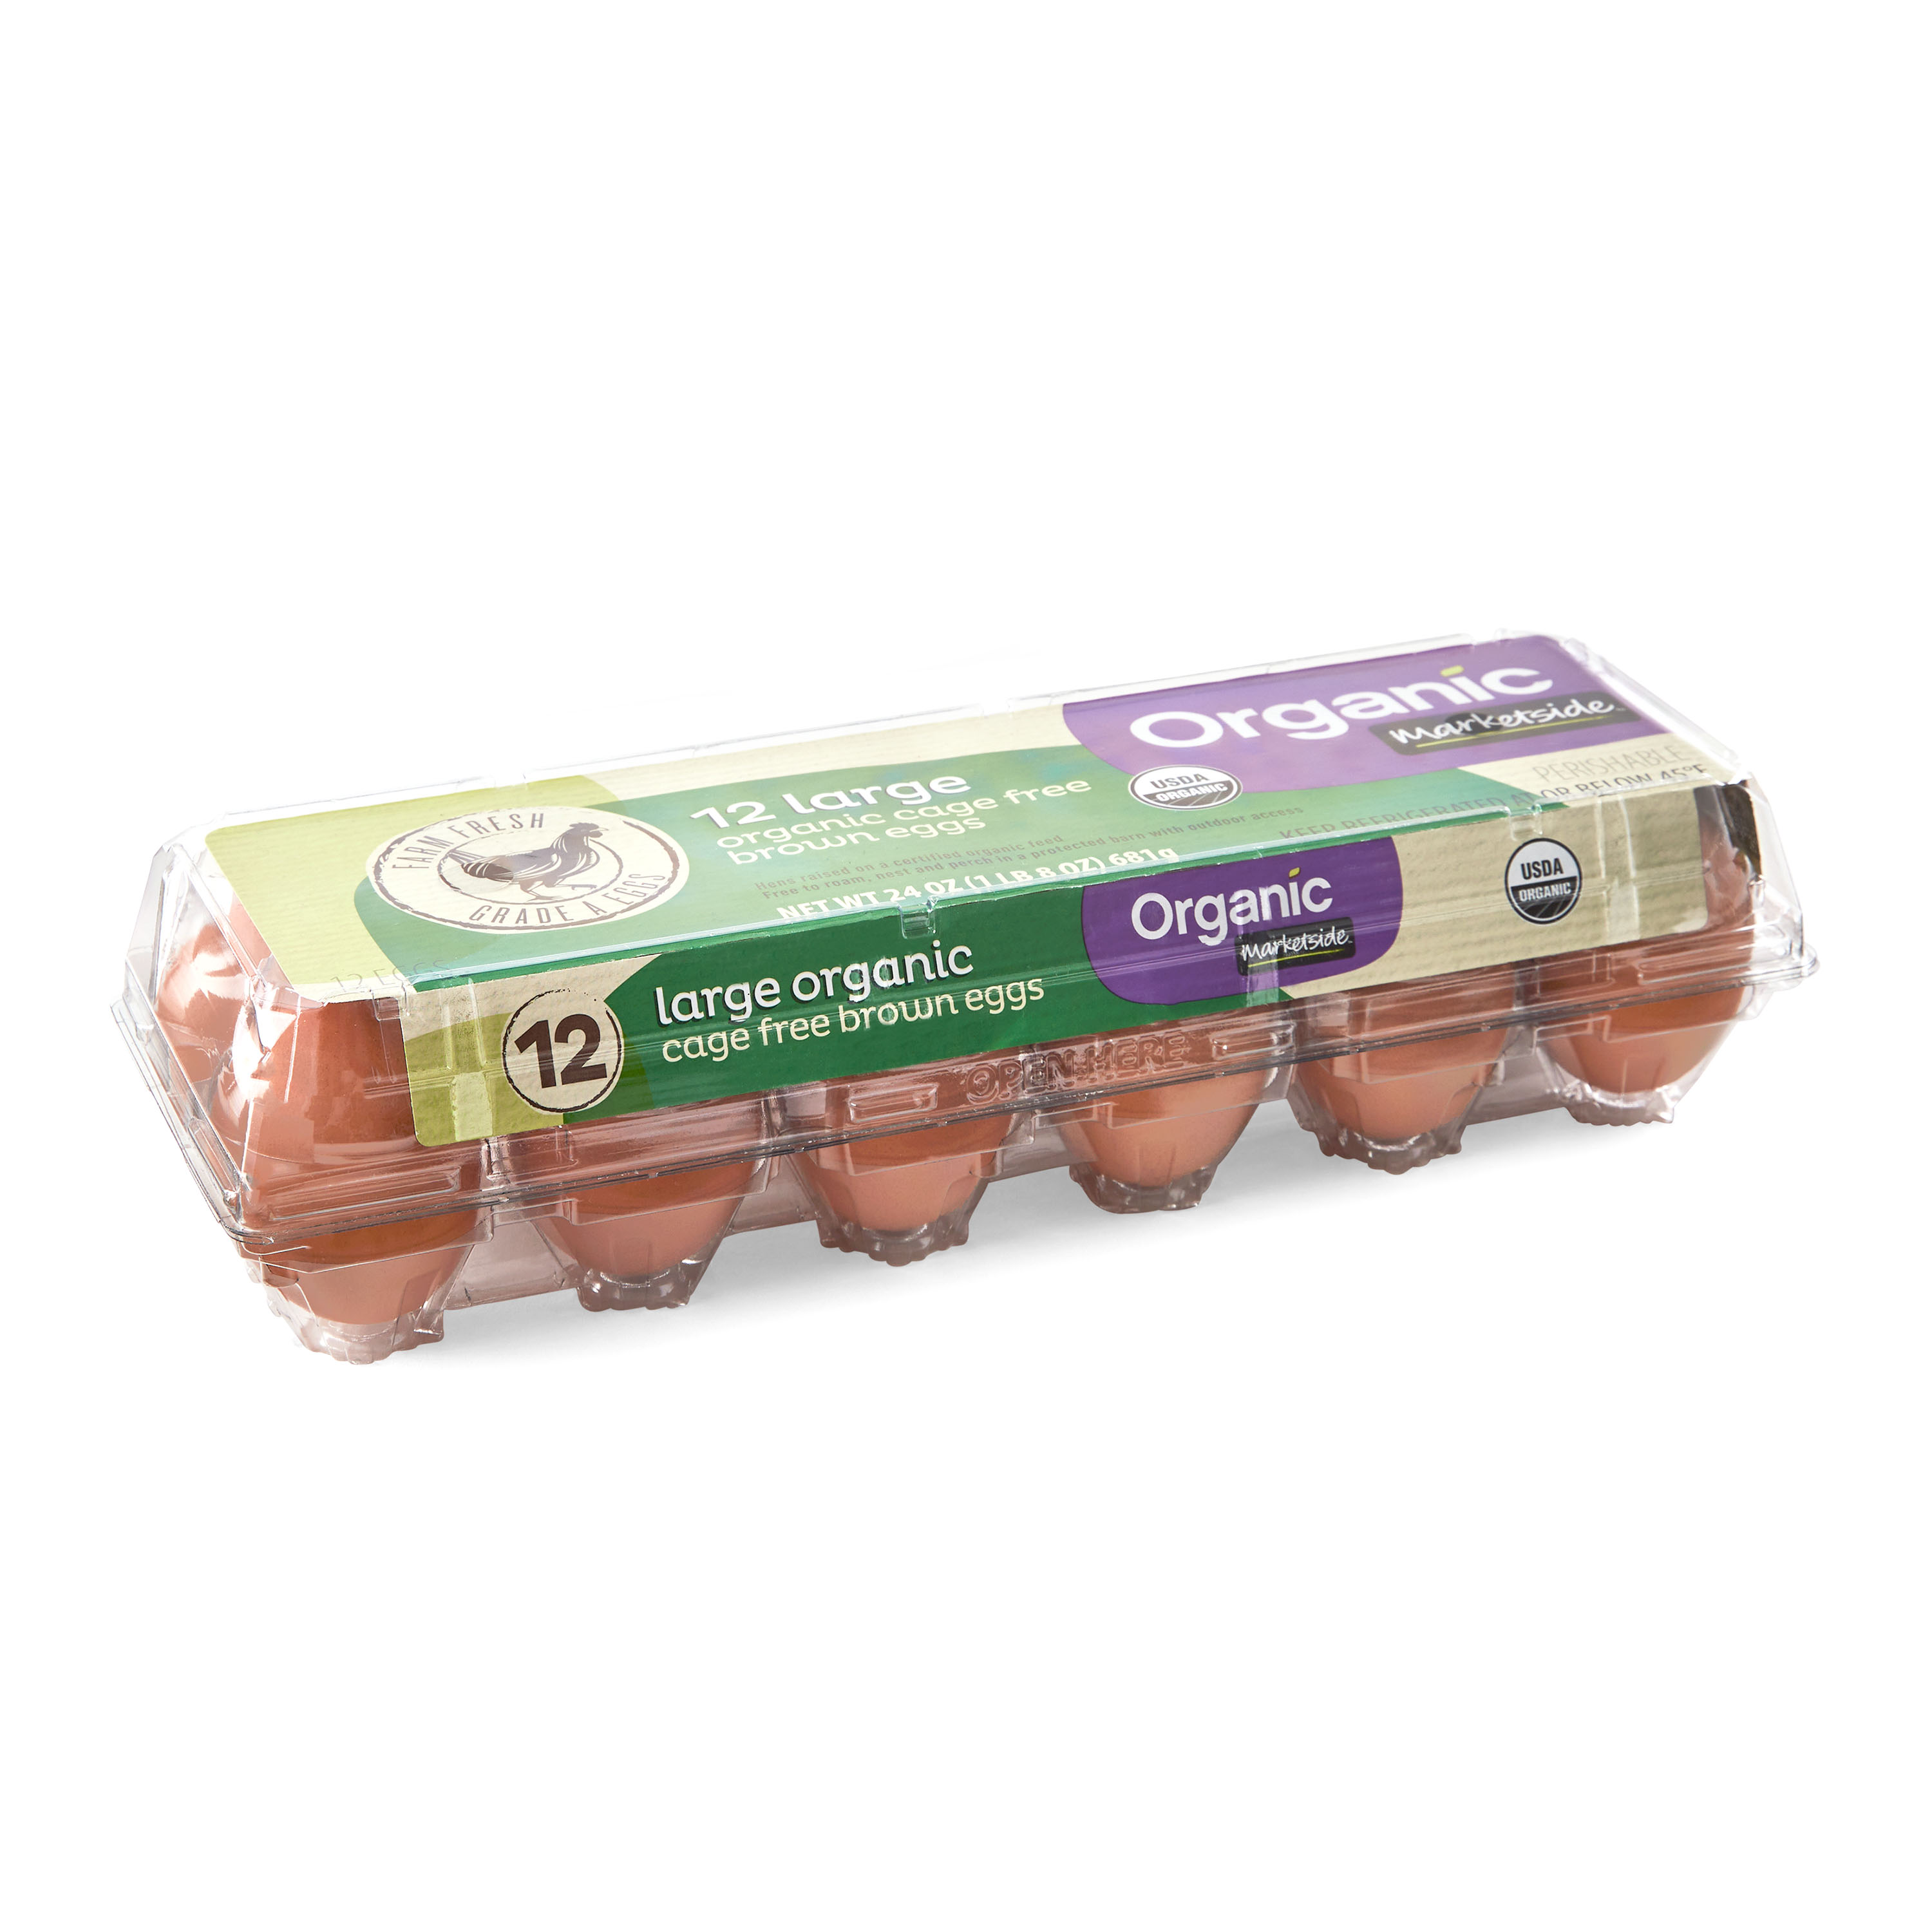 Marketside Organic Cage-Free Large Brown Eggs, 12 Count - image 1 of 6